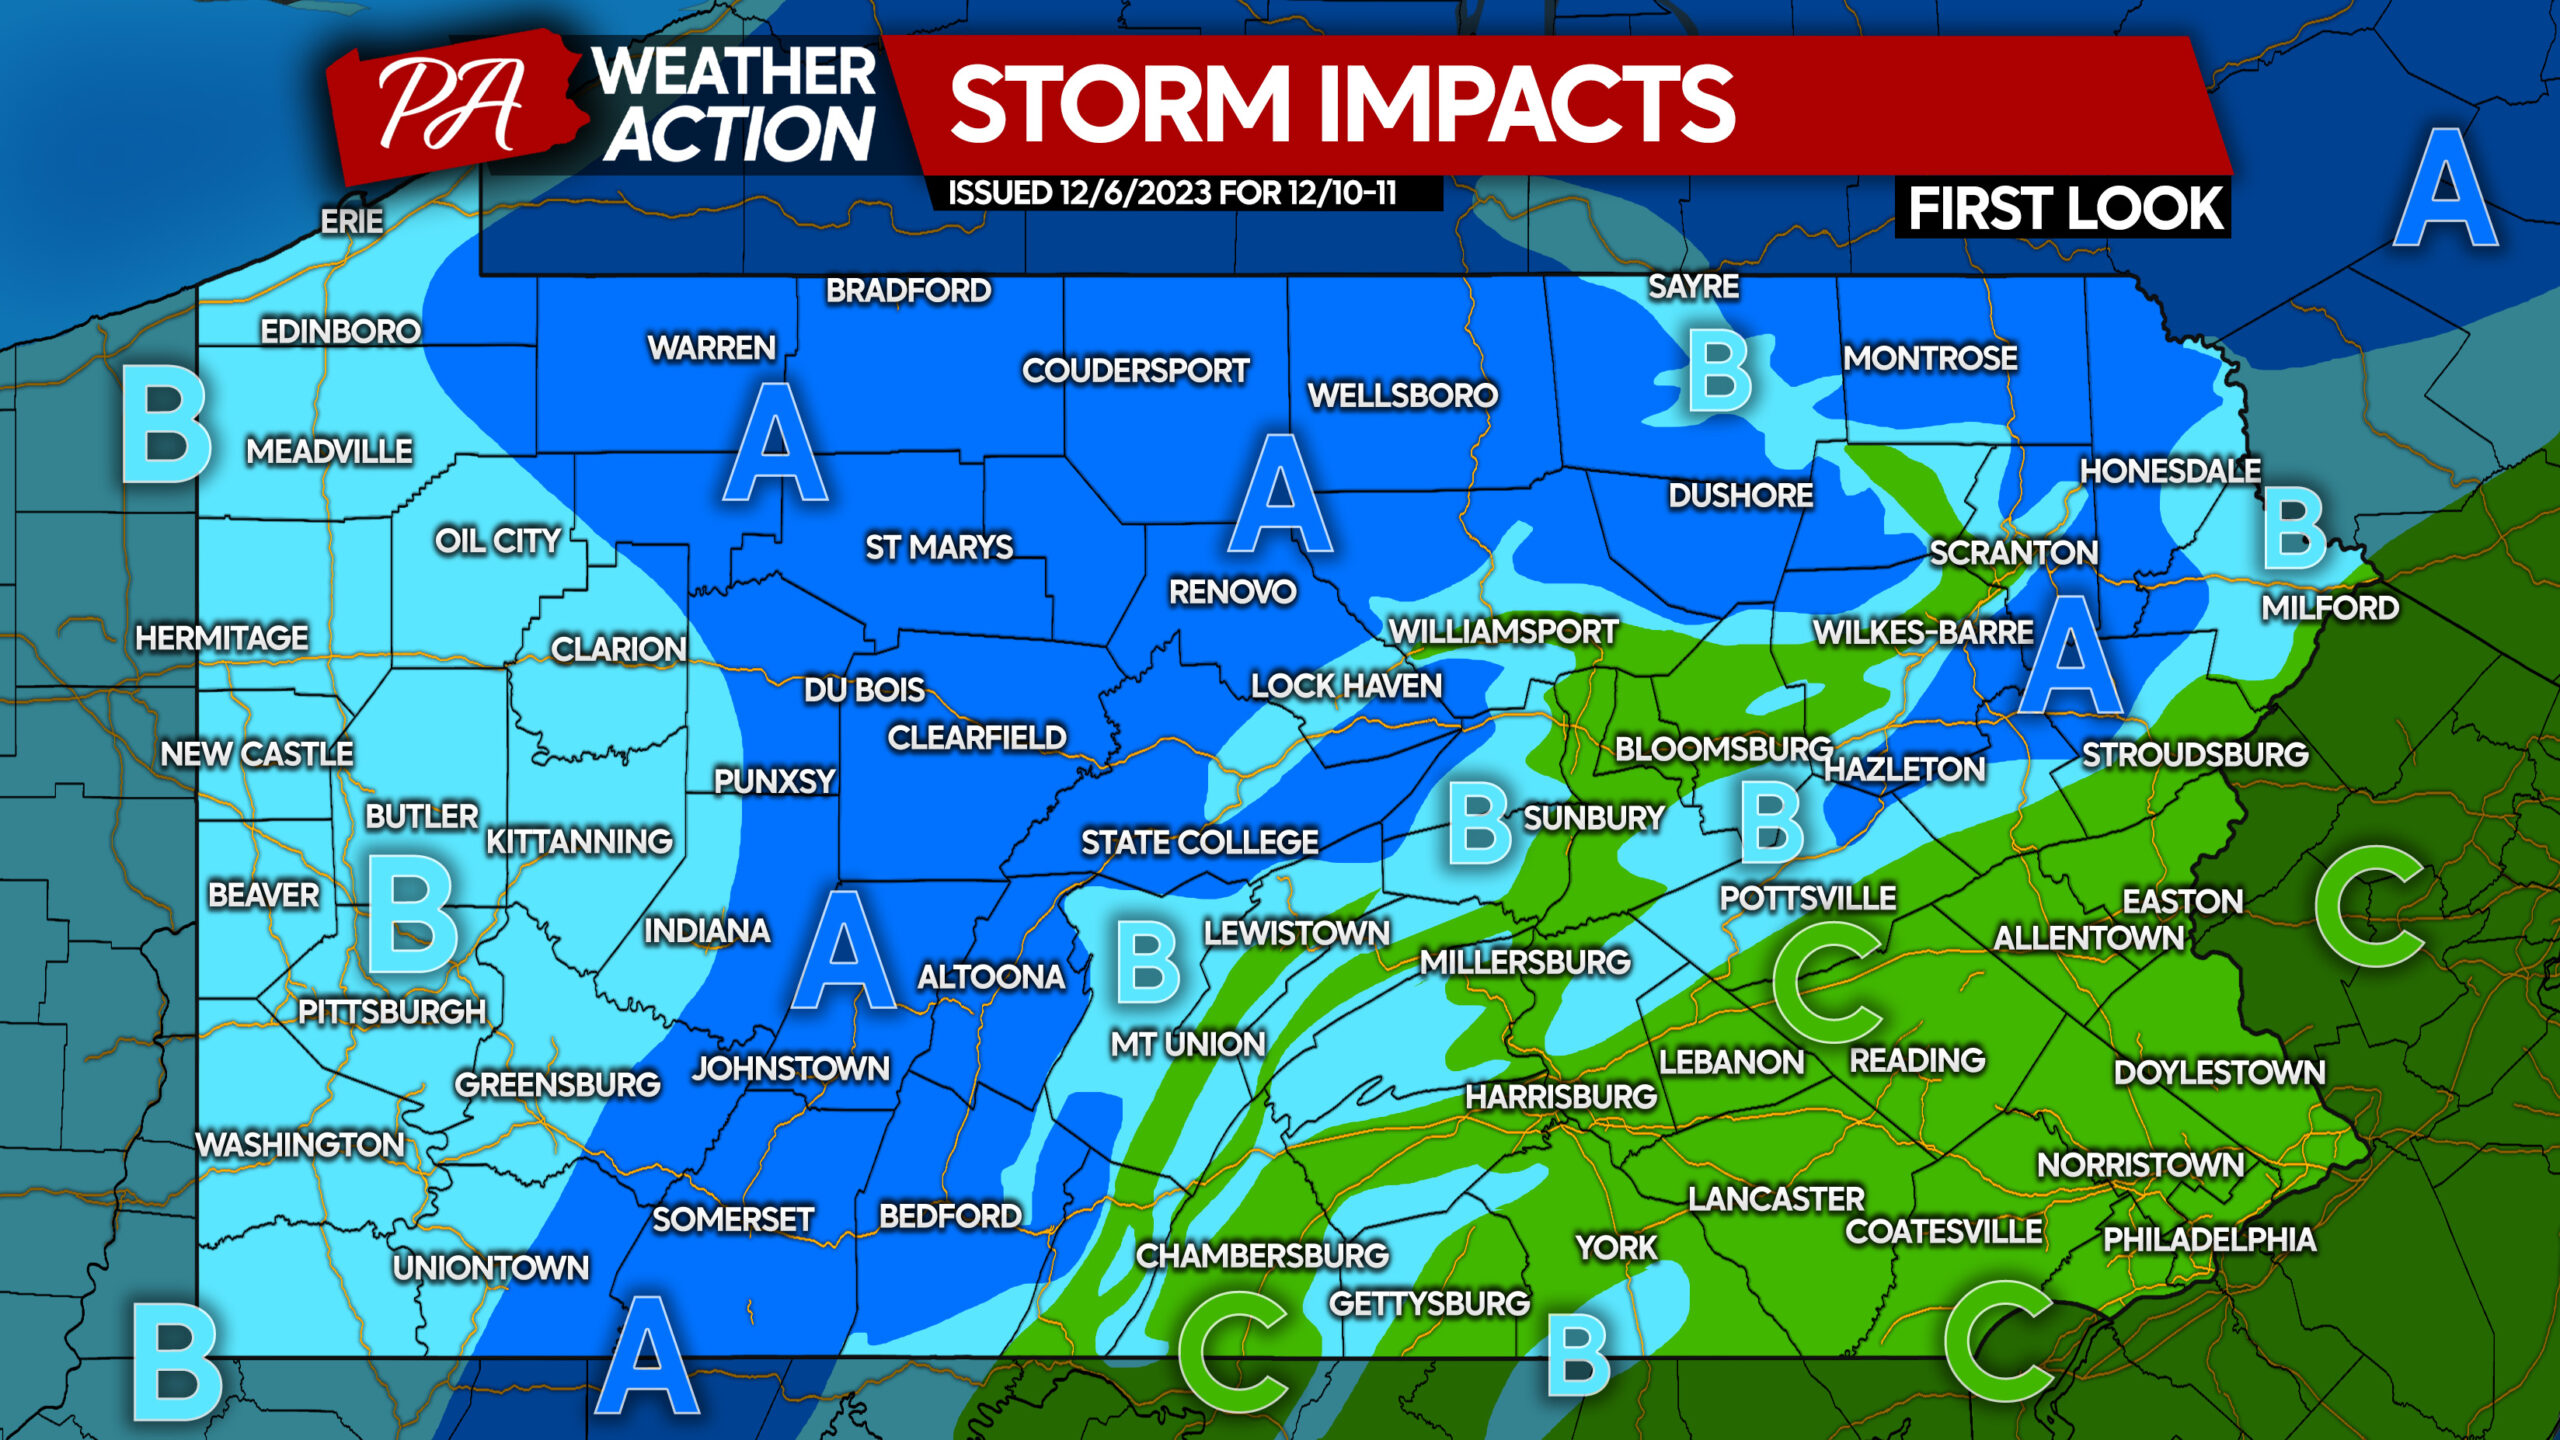 First Call Snowfall Forecast for Tonight's Surprise Heavy Snow In Parts of  Pennsylvania - PA Weather Action